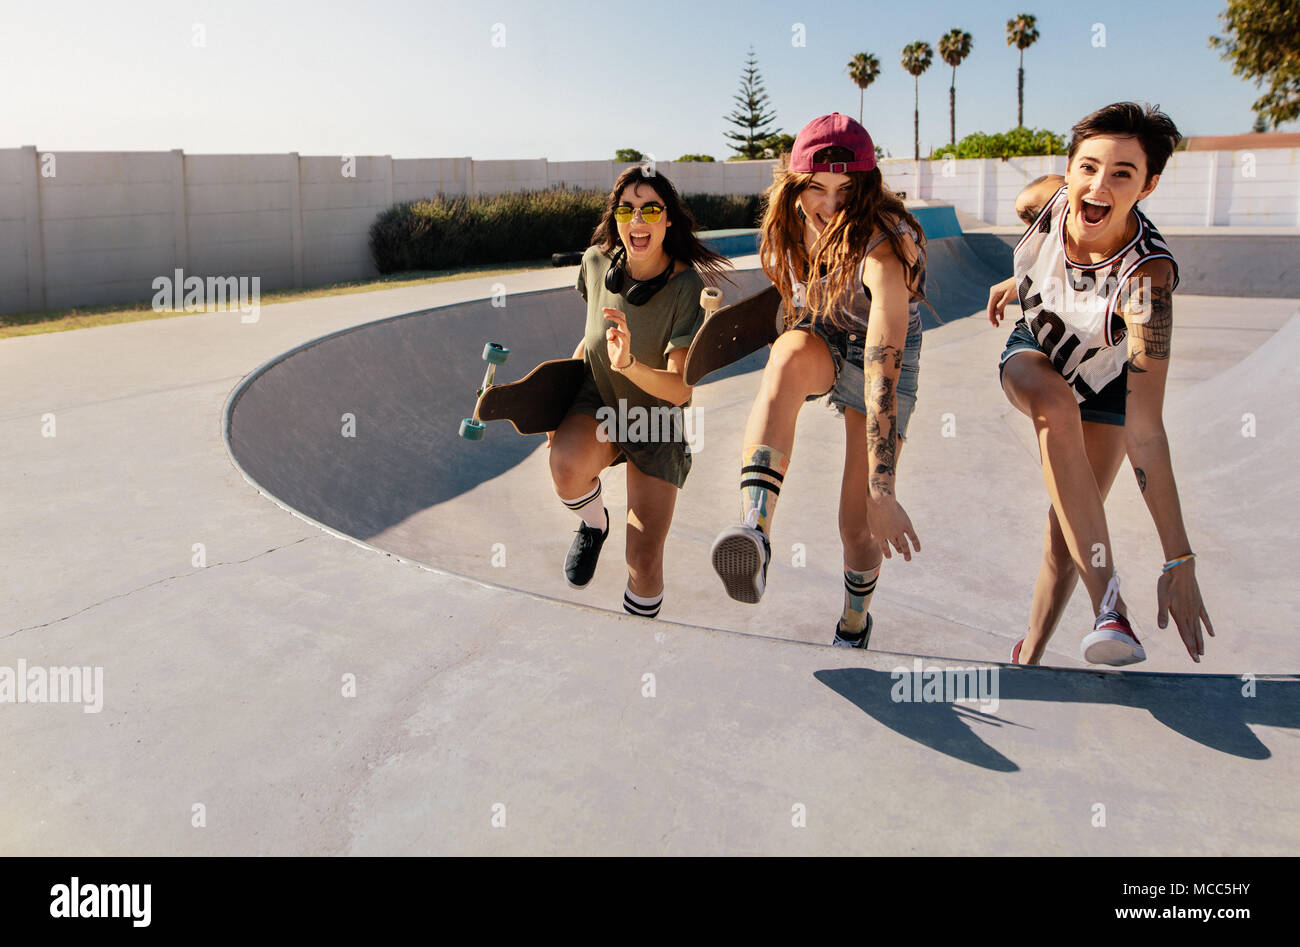 Laughing women climbing a skateboard ramp. Group of girls having a great  time at skate park Stock Photo - Alamy